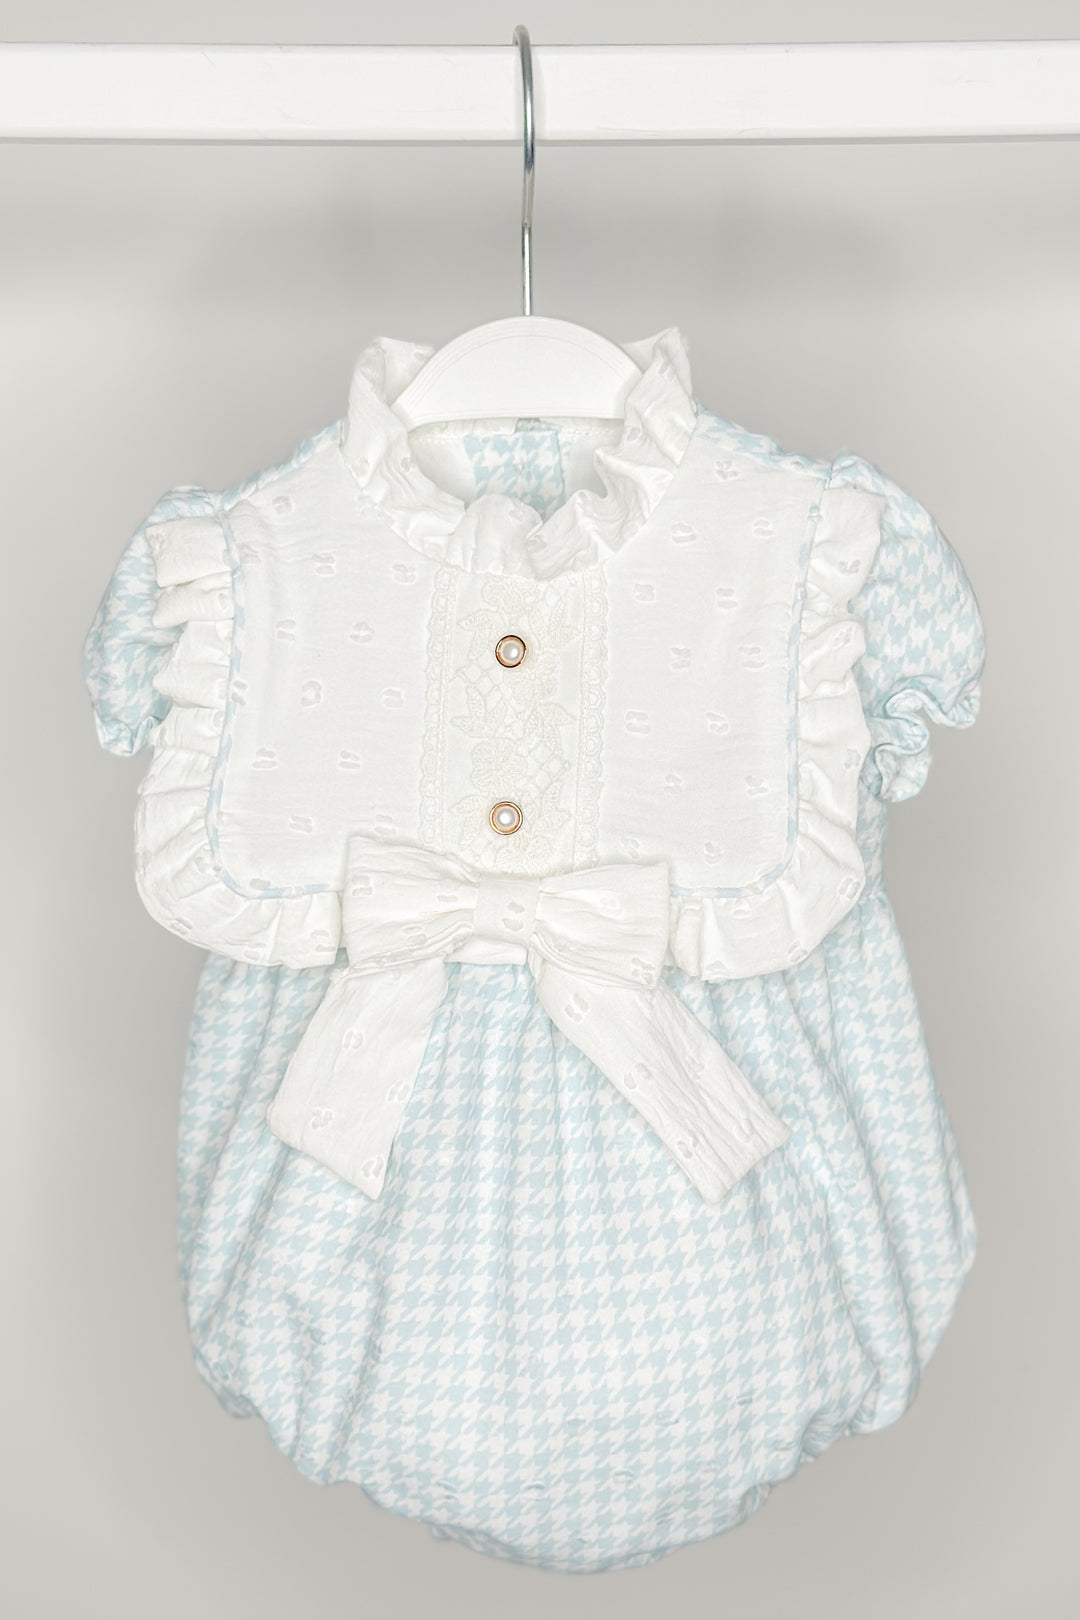 Fofettes "Brielle" Pale Blue Houndstooth Romper | Millie and John